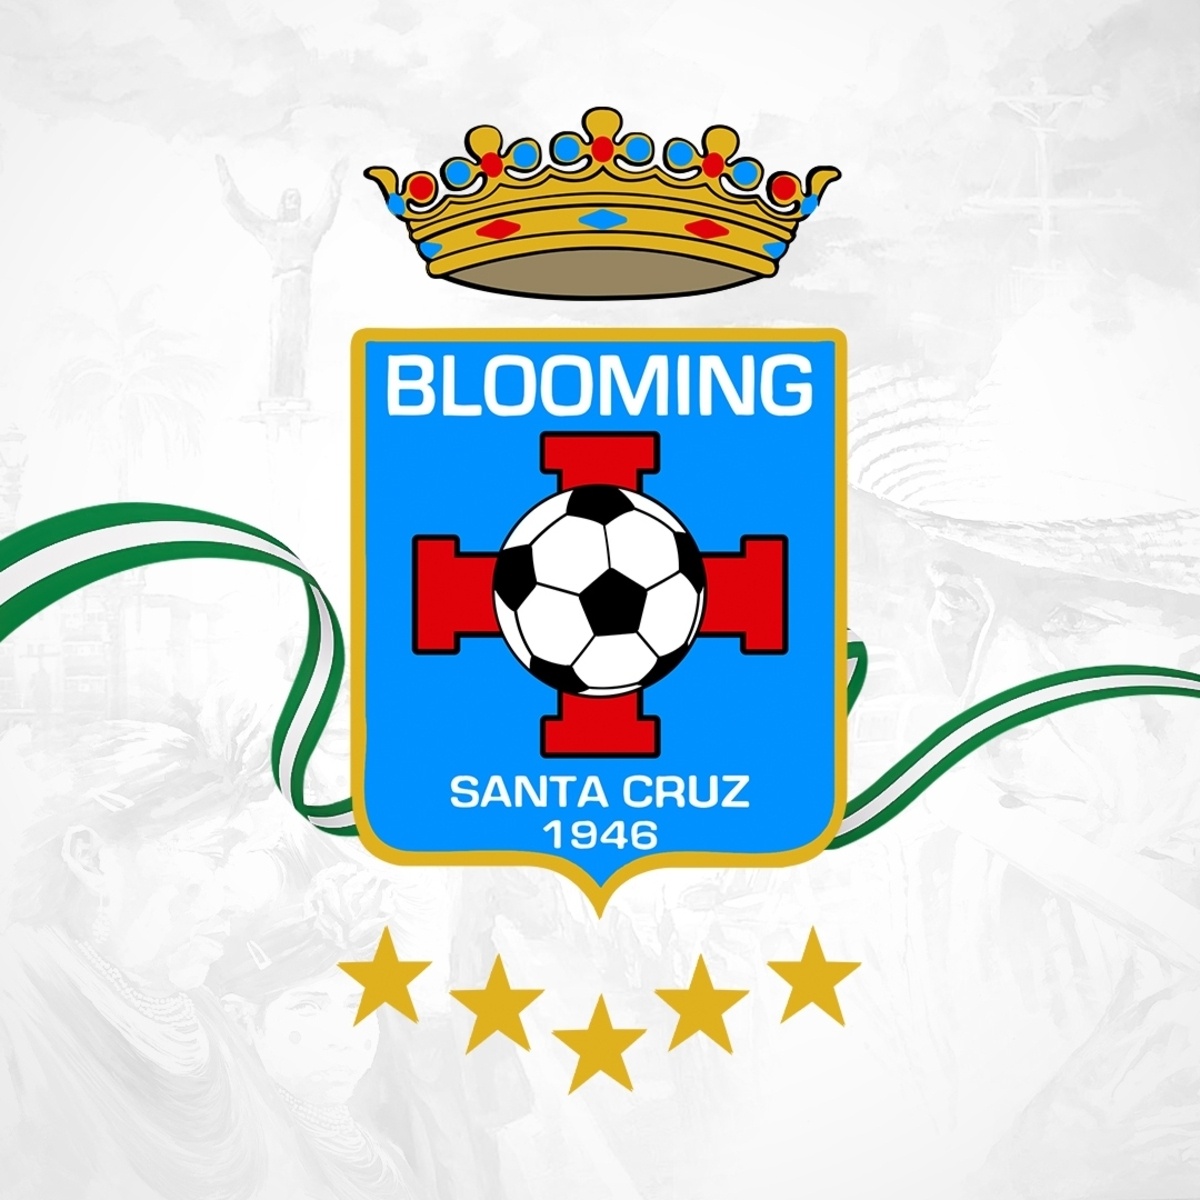 club-blooming-23-football-club-facts